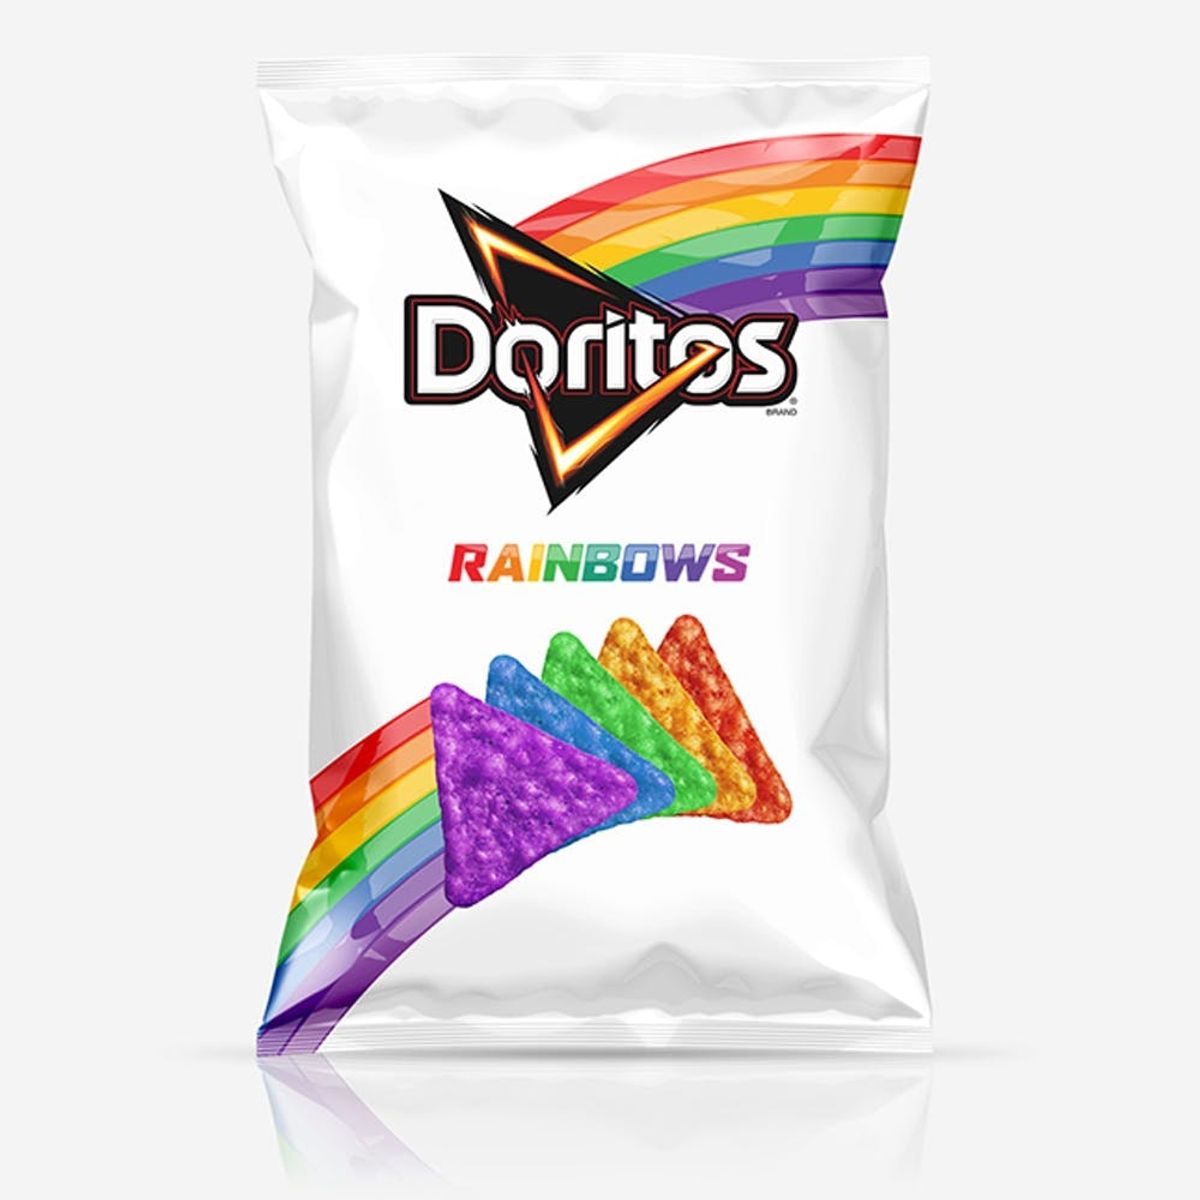 Crazy New Doritos + Unicorn Gin = Your New Favorite WTF Food Combo